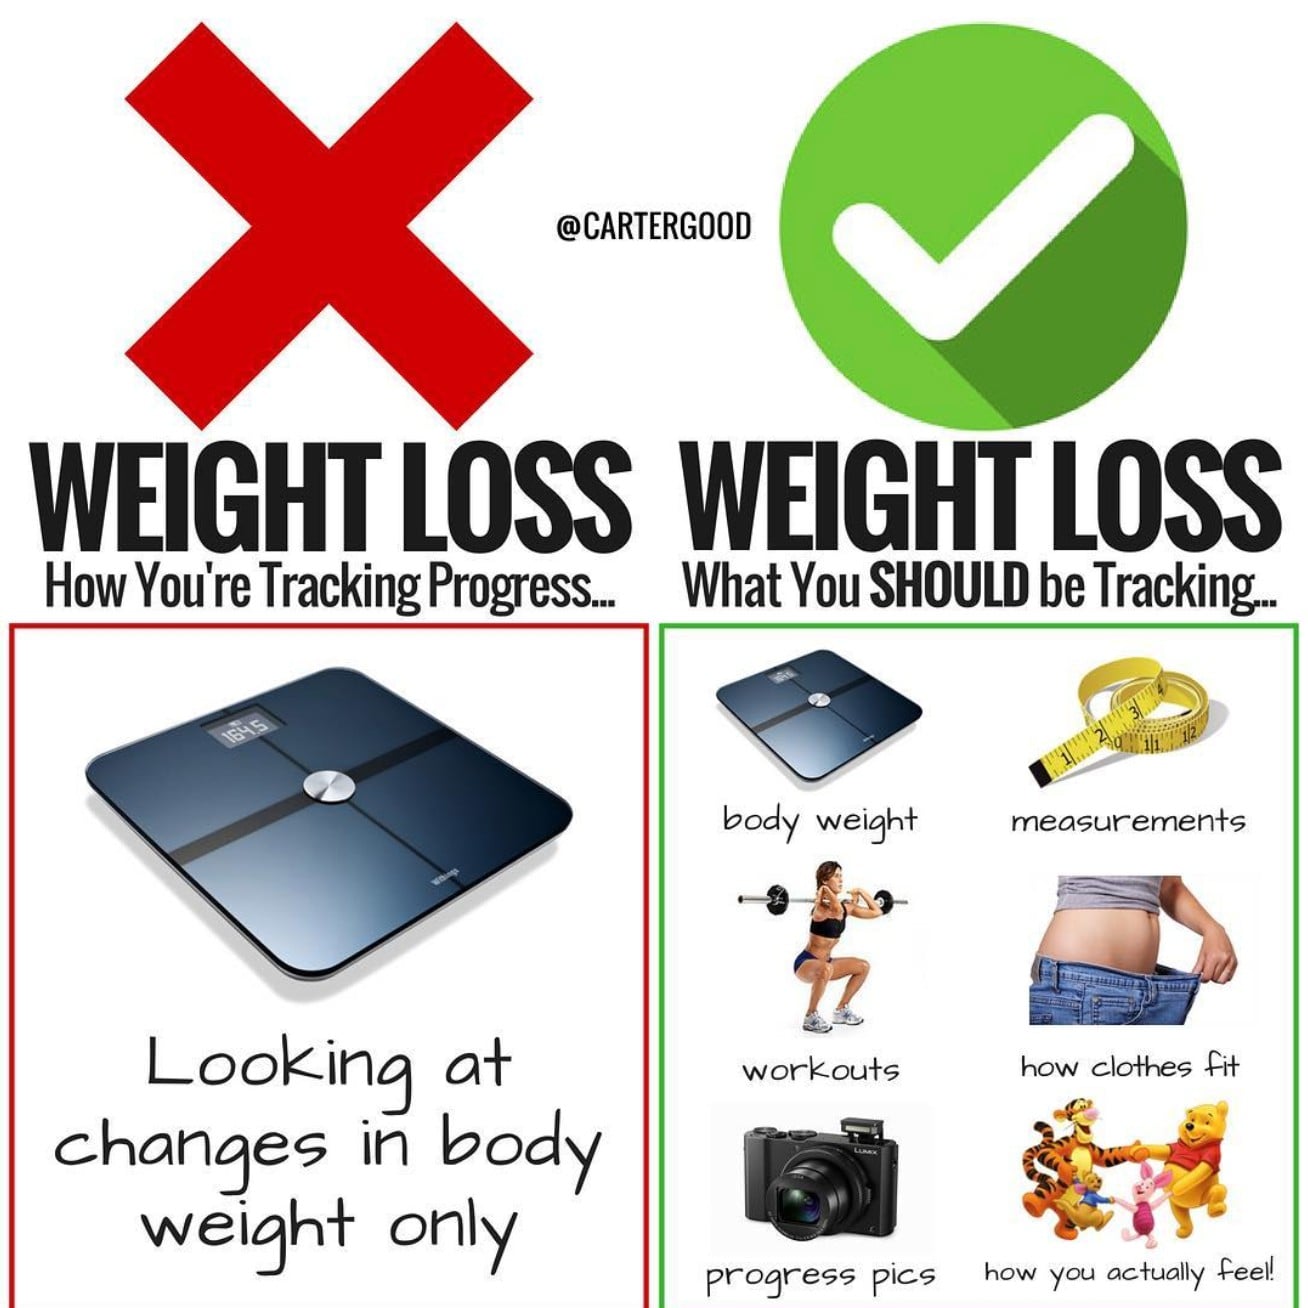 5 things to consider while tracking your weight loss with a